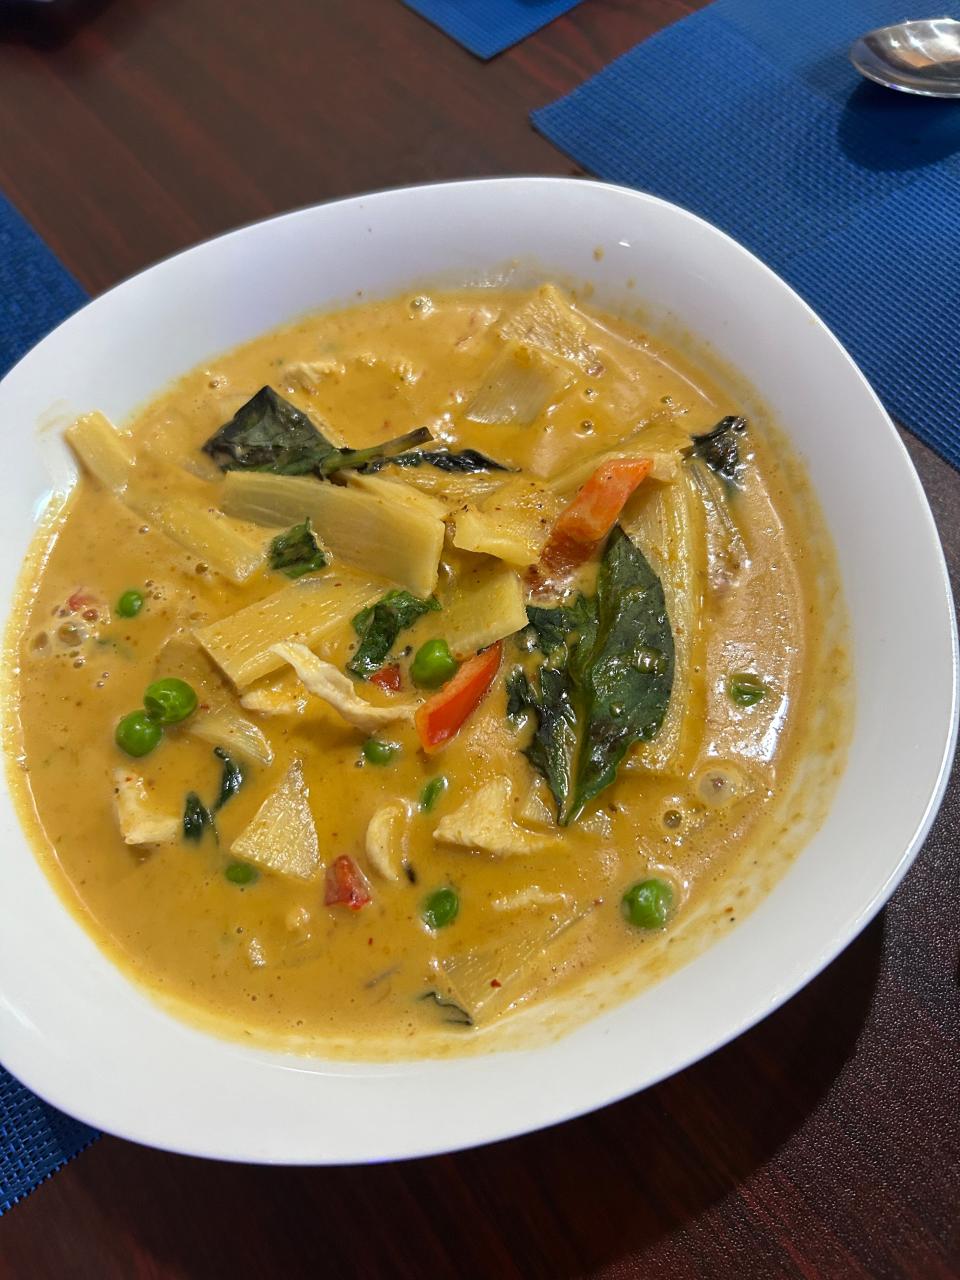 Red curry at Lyeh Thai is made with Thai traditional green curry paste with coconut milk, bamboo shoots, peas, basil leaves and red bell pepper.